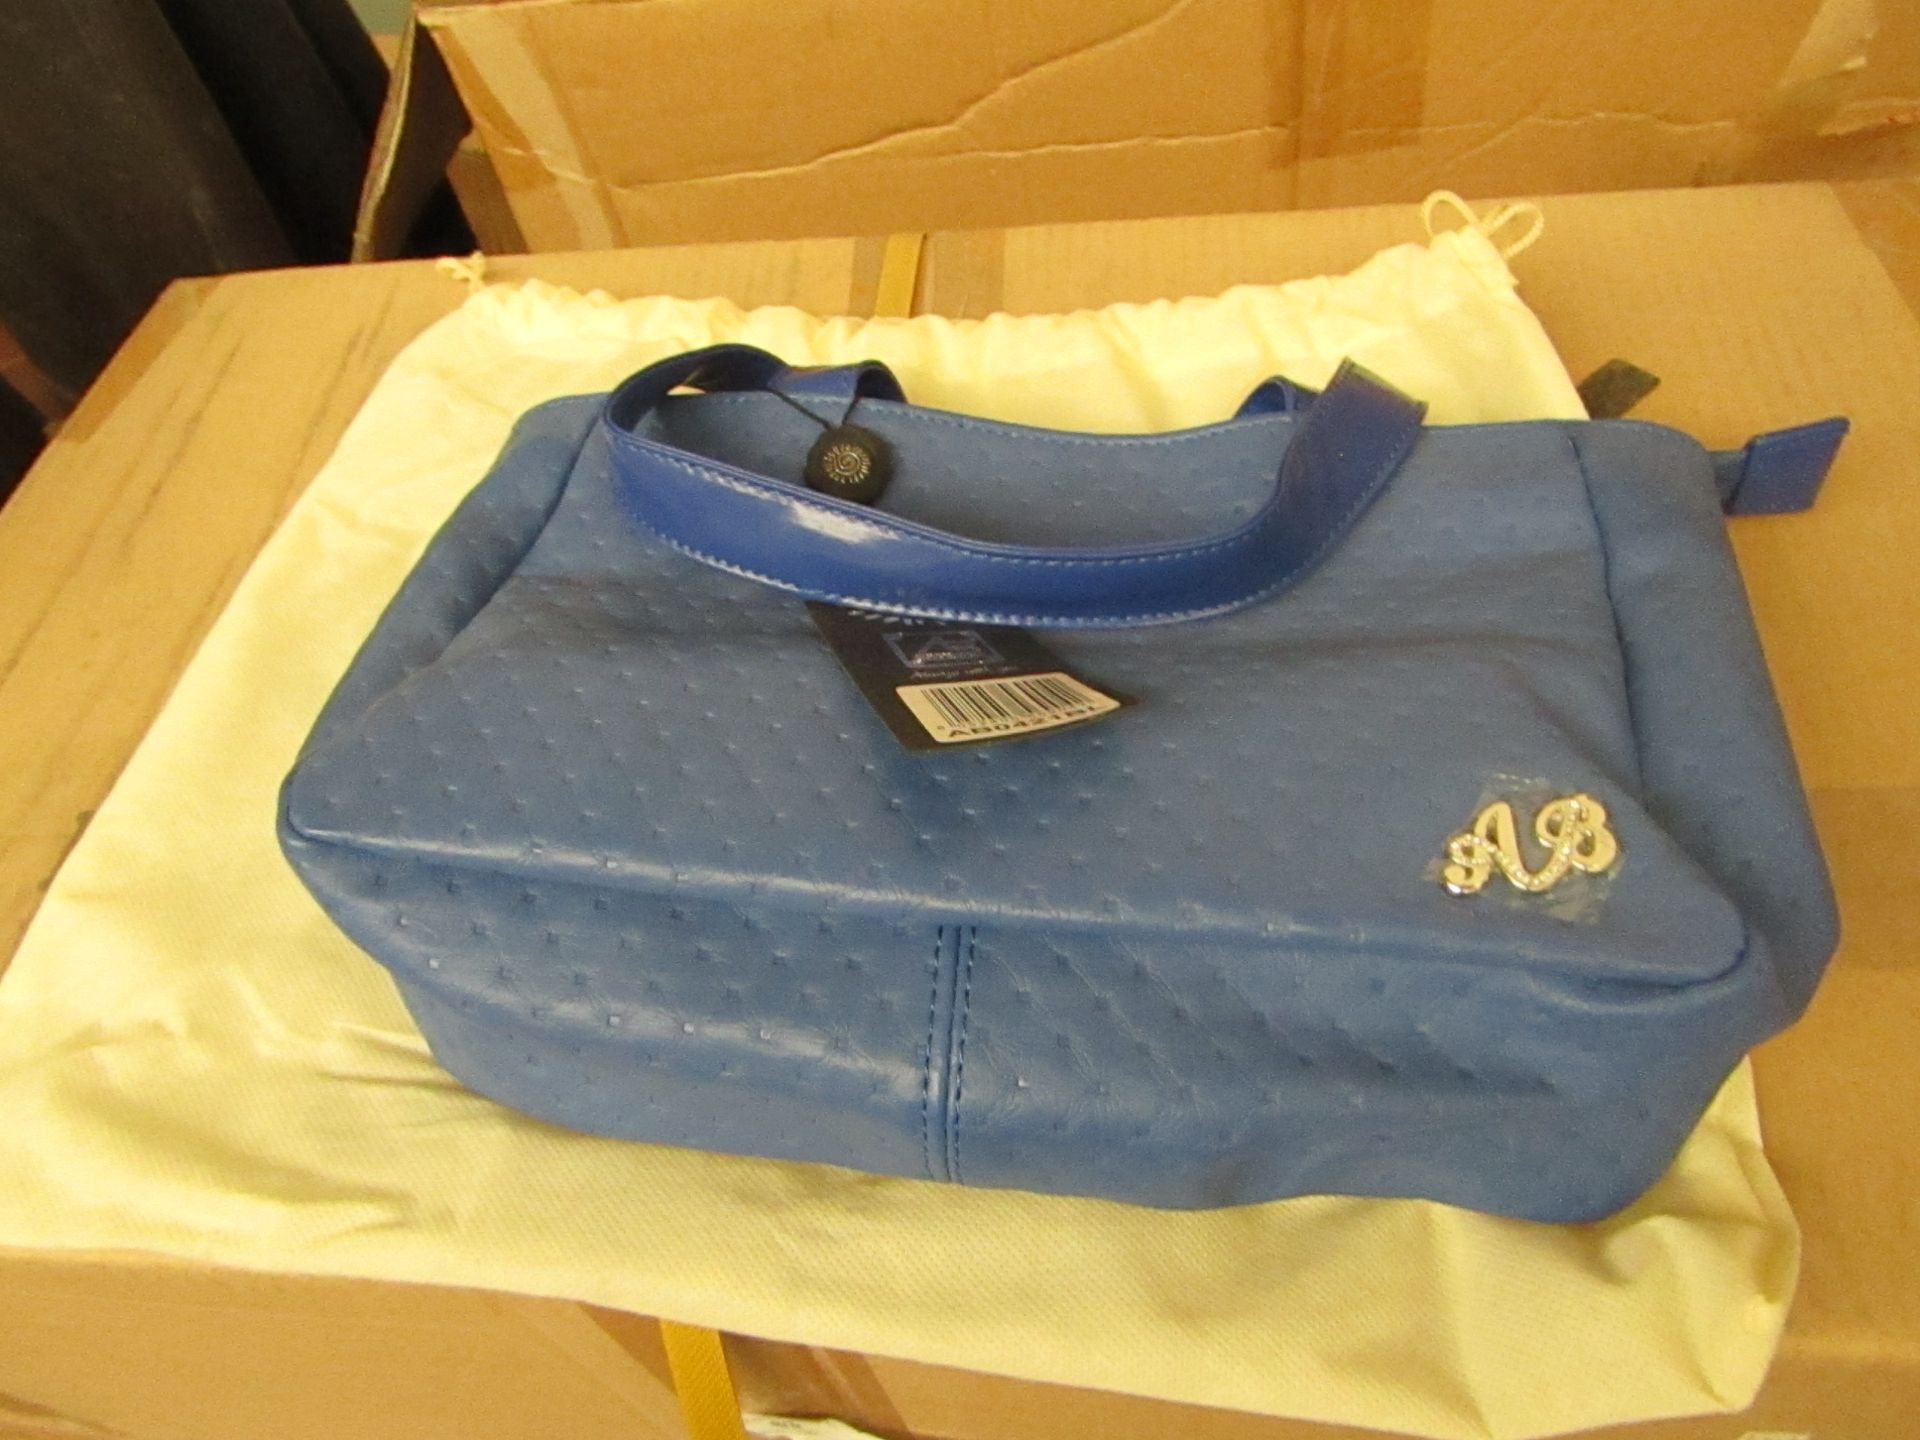 6 x AB Collizioni - Ladies Blue Handbags with Dustbags RRP £9.99 on ebay - New with tags